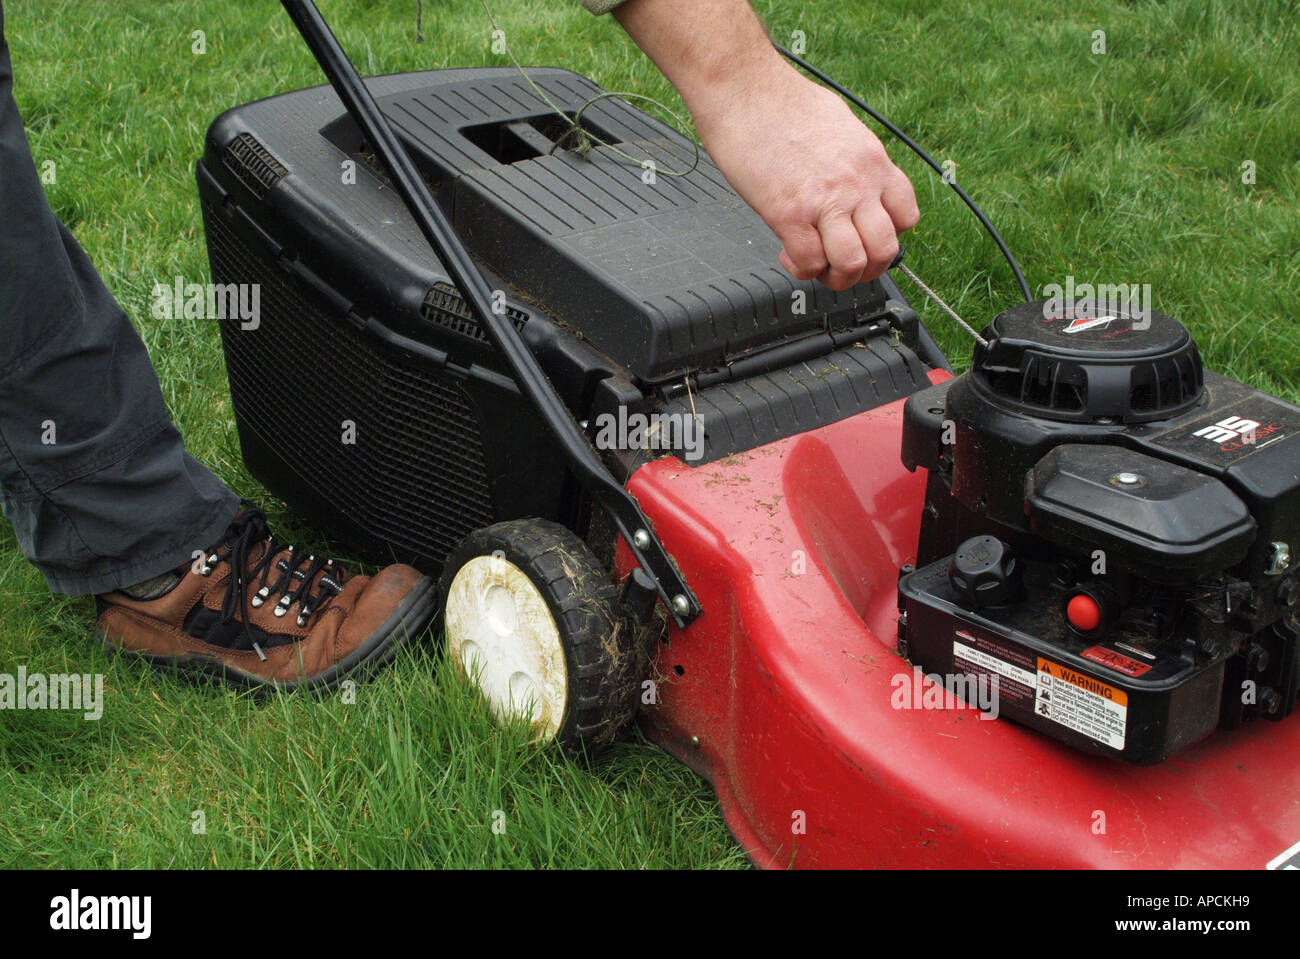 Starting the engine of a petrol driven lawn mower Stock Photo